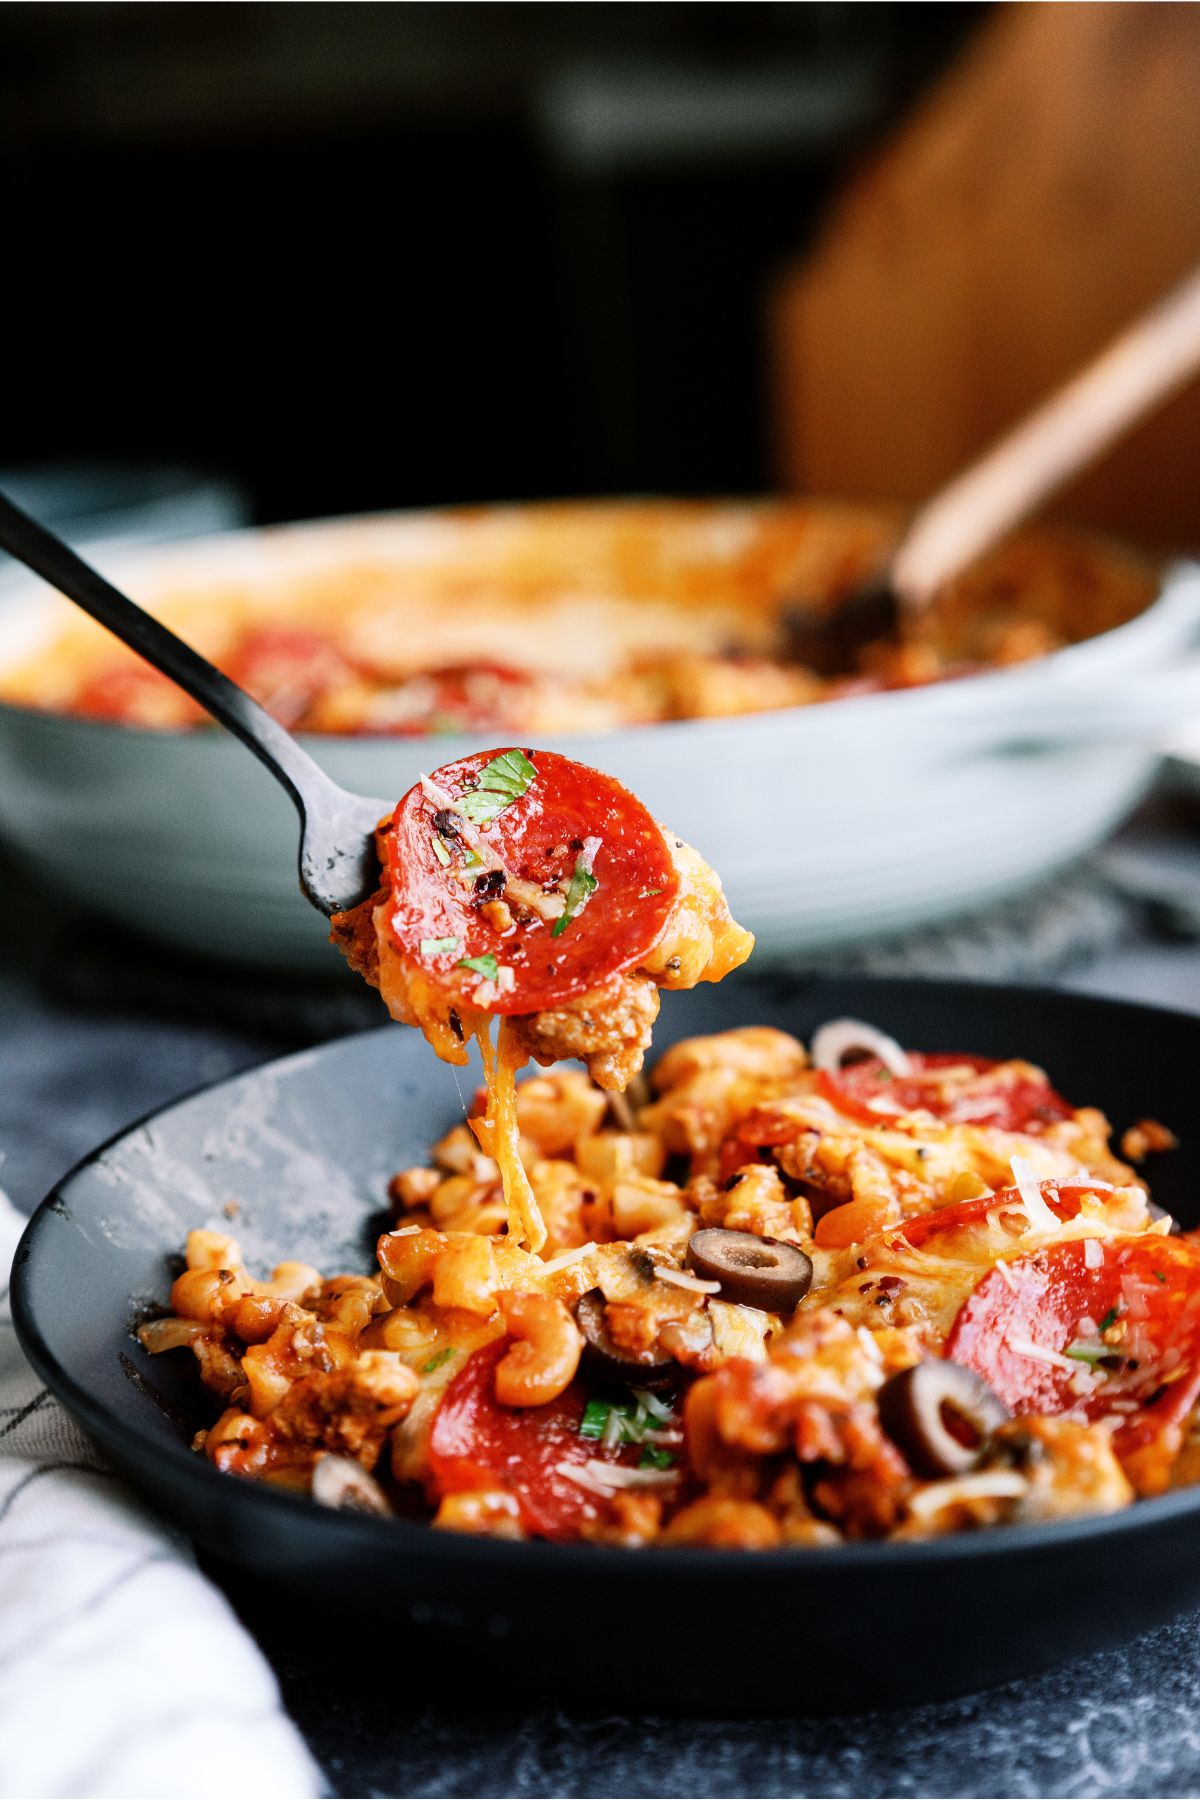 A serving of Pizza Skillet Pasta in a bowl with a fork lifting a bite out